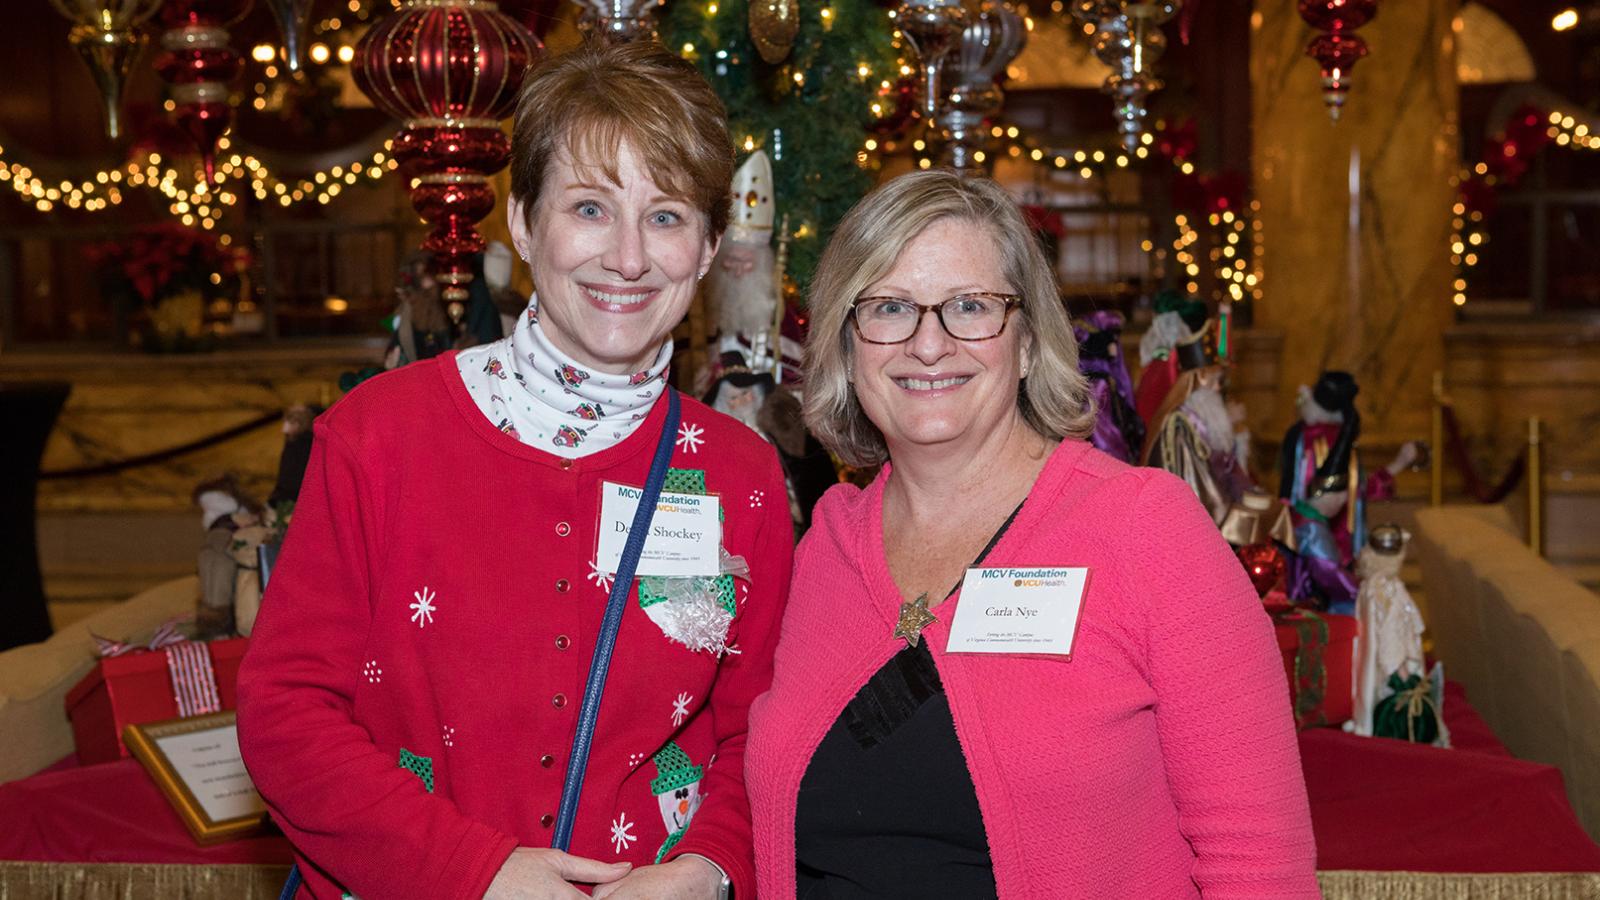 Debbie Shockey (left), D.N.P., former recipient of a Ginger Edwards Clinical Scholars Award, and Carla Nye, D.N.P., former recipient of a Mimi Bennet Clinical Scholars Award.